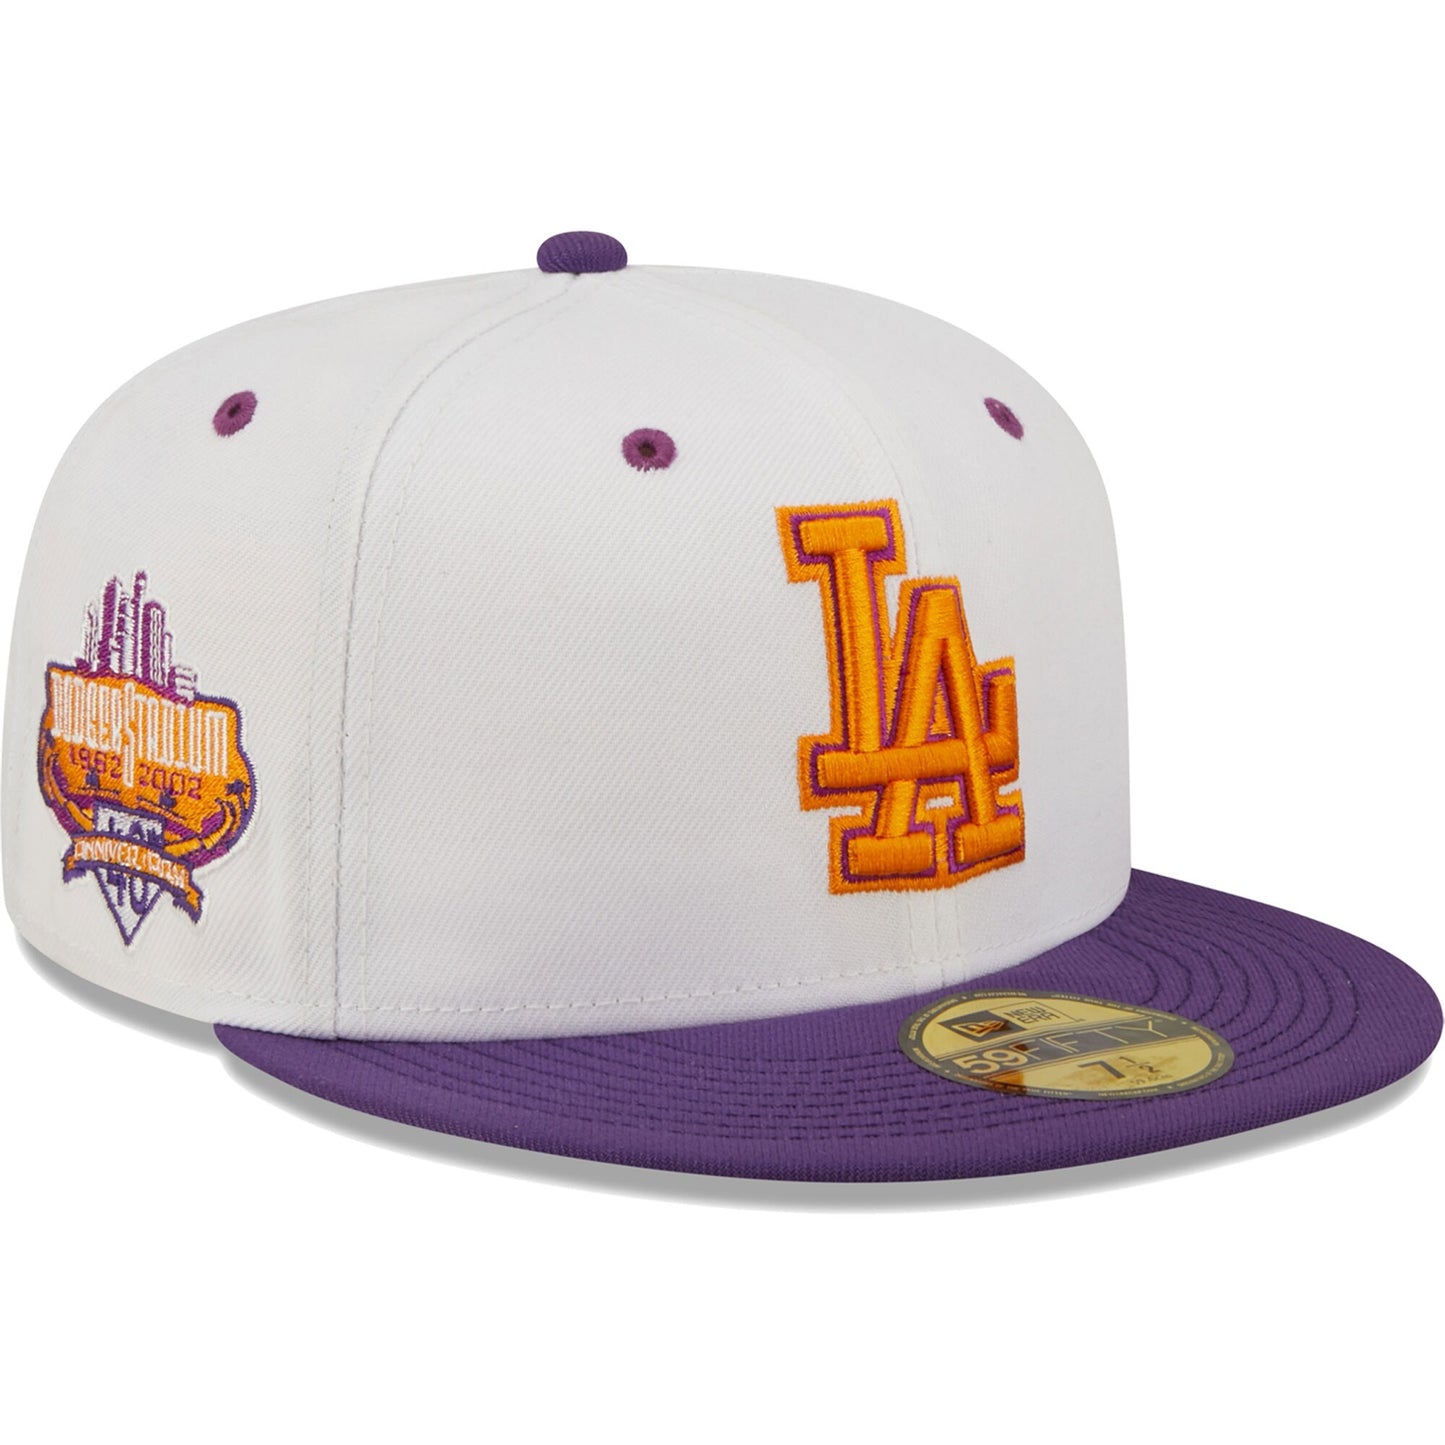 Los Angeles Dodgers New Era 40th Anniversary at Dodger Stadium Grape Lolli 59FIFTY Fitted Hat - White/Purple